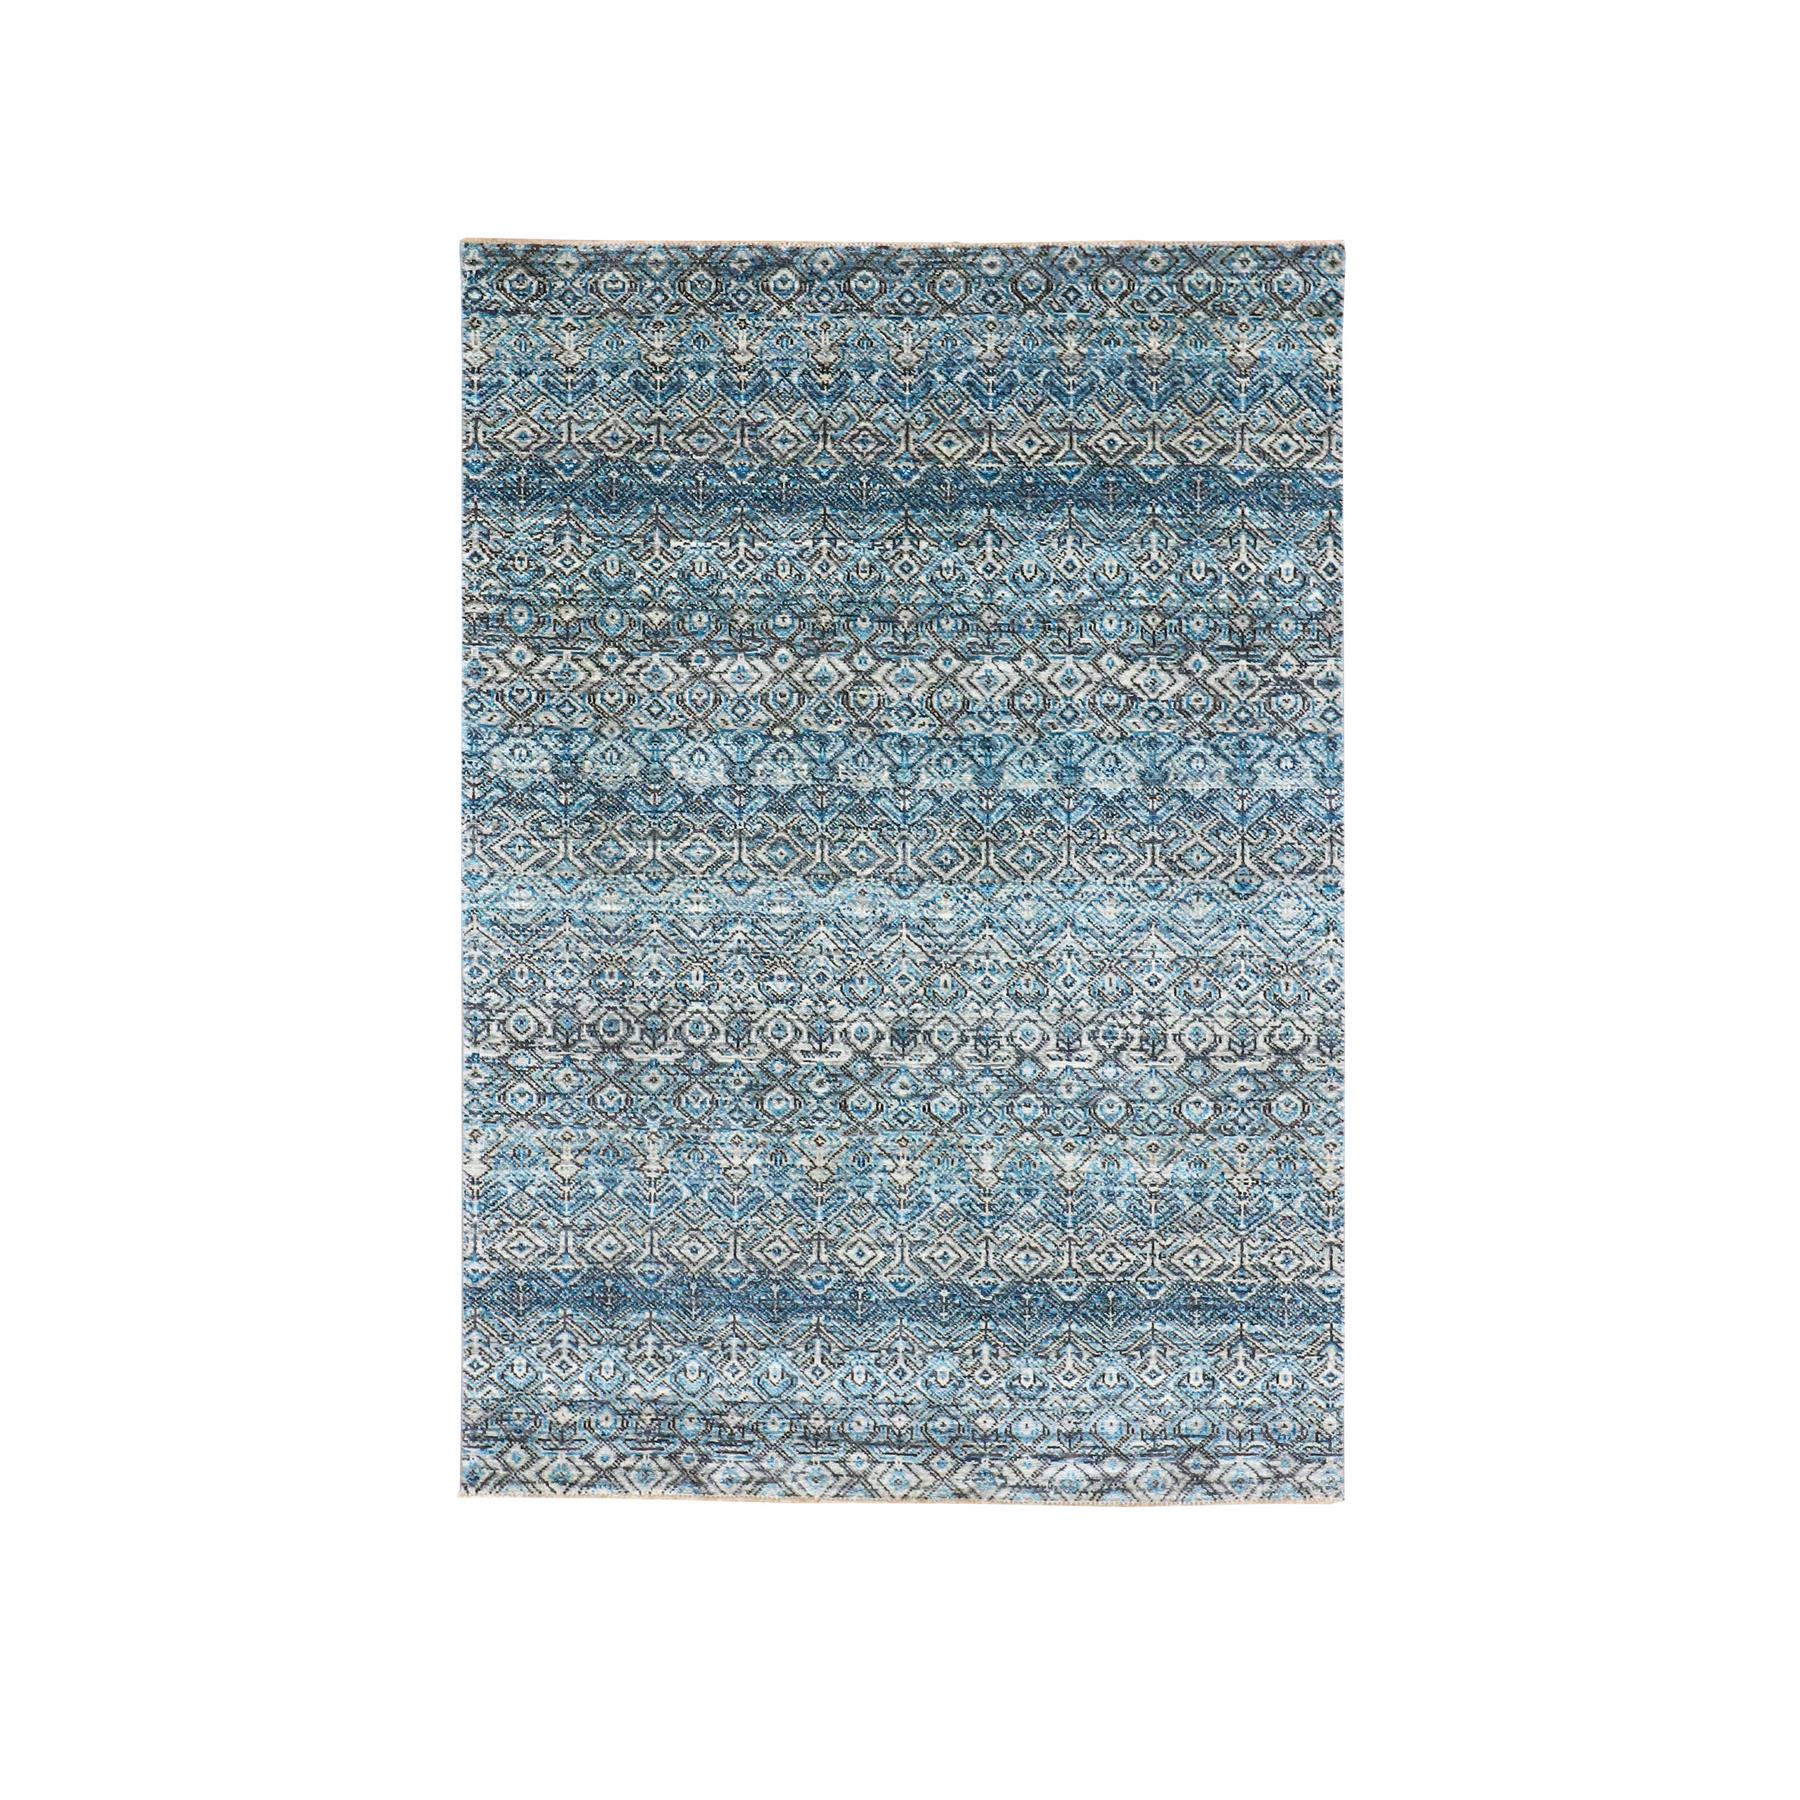  Wool Hand-Knotted Area Rug 4'1